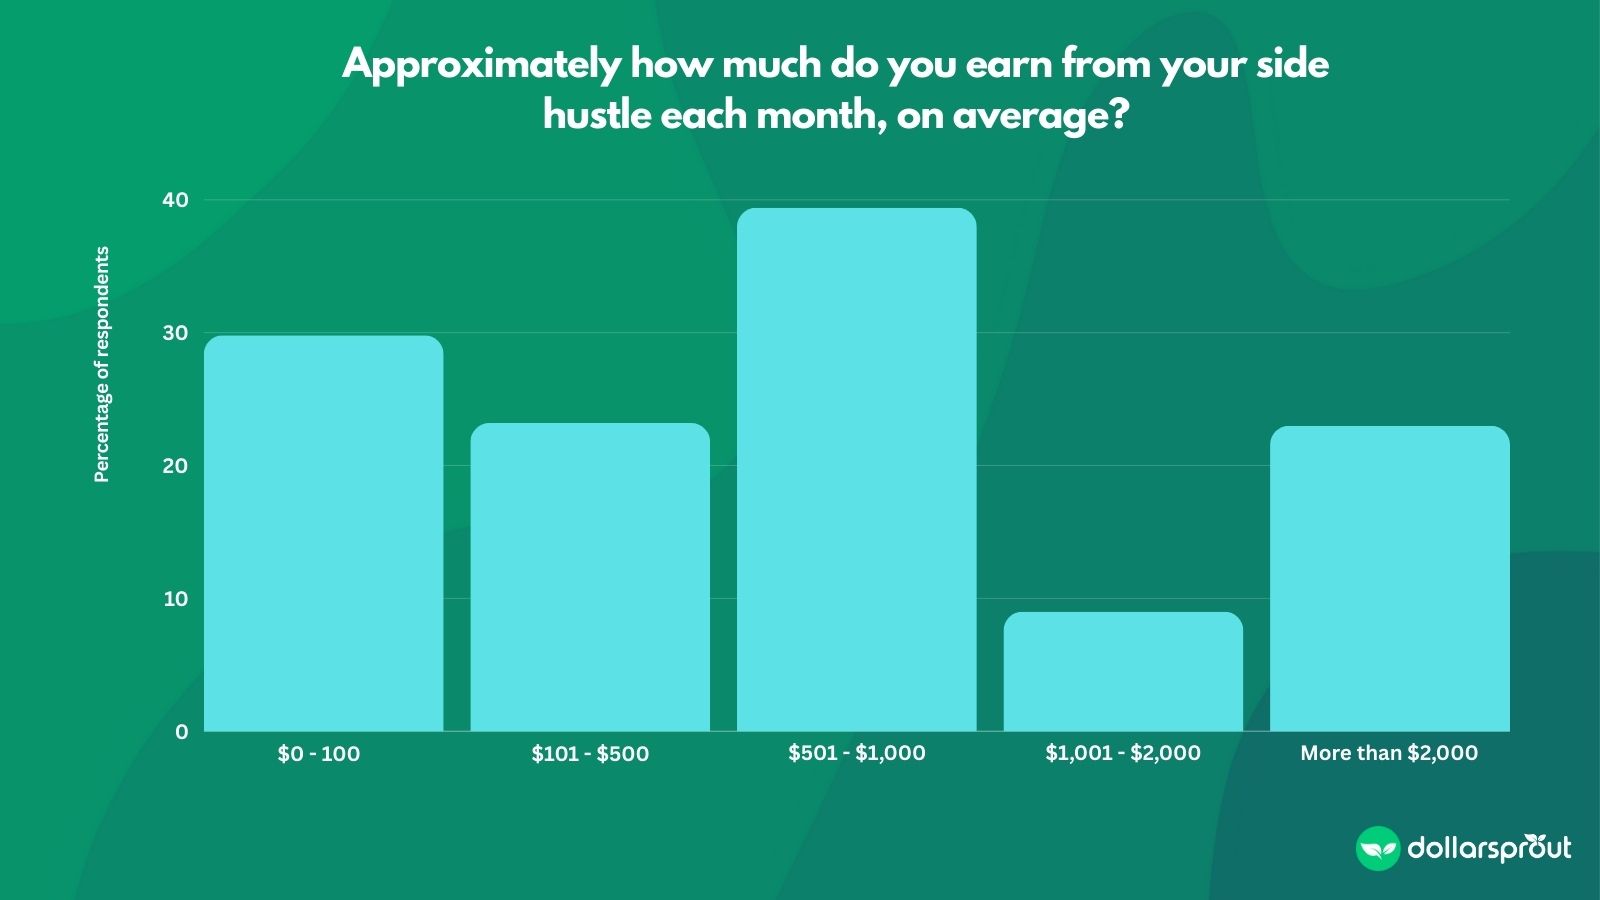 A chart showing how much money people earn from side hustles each month